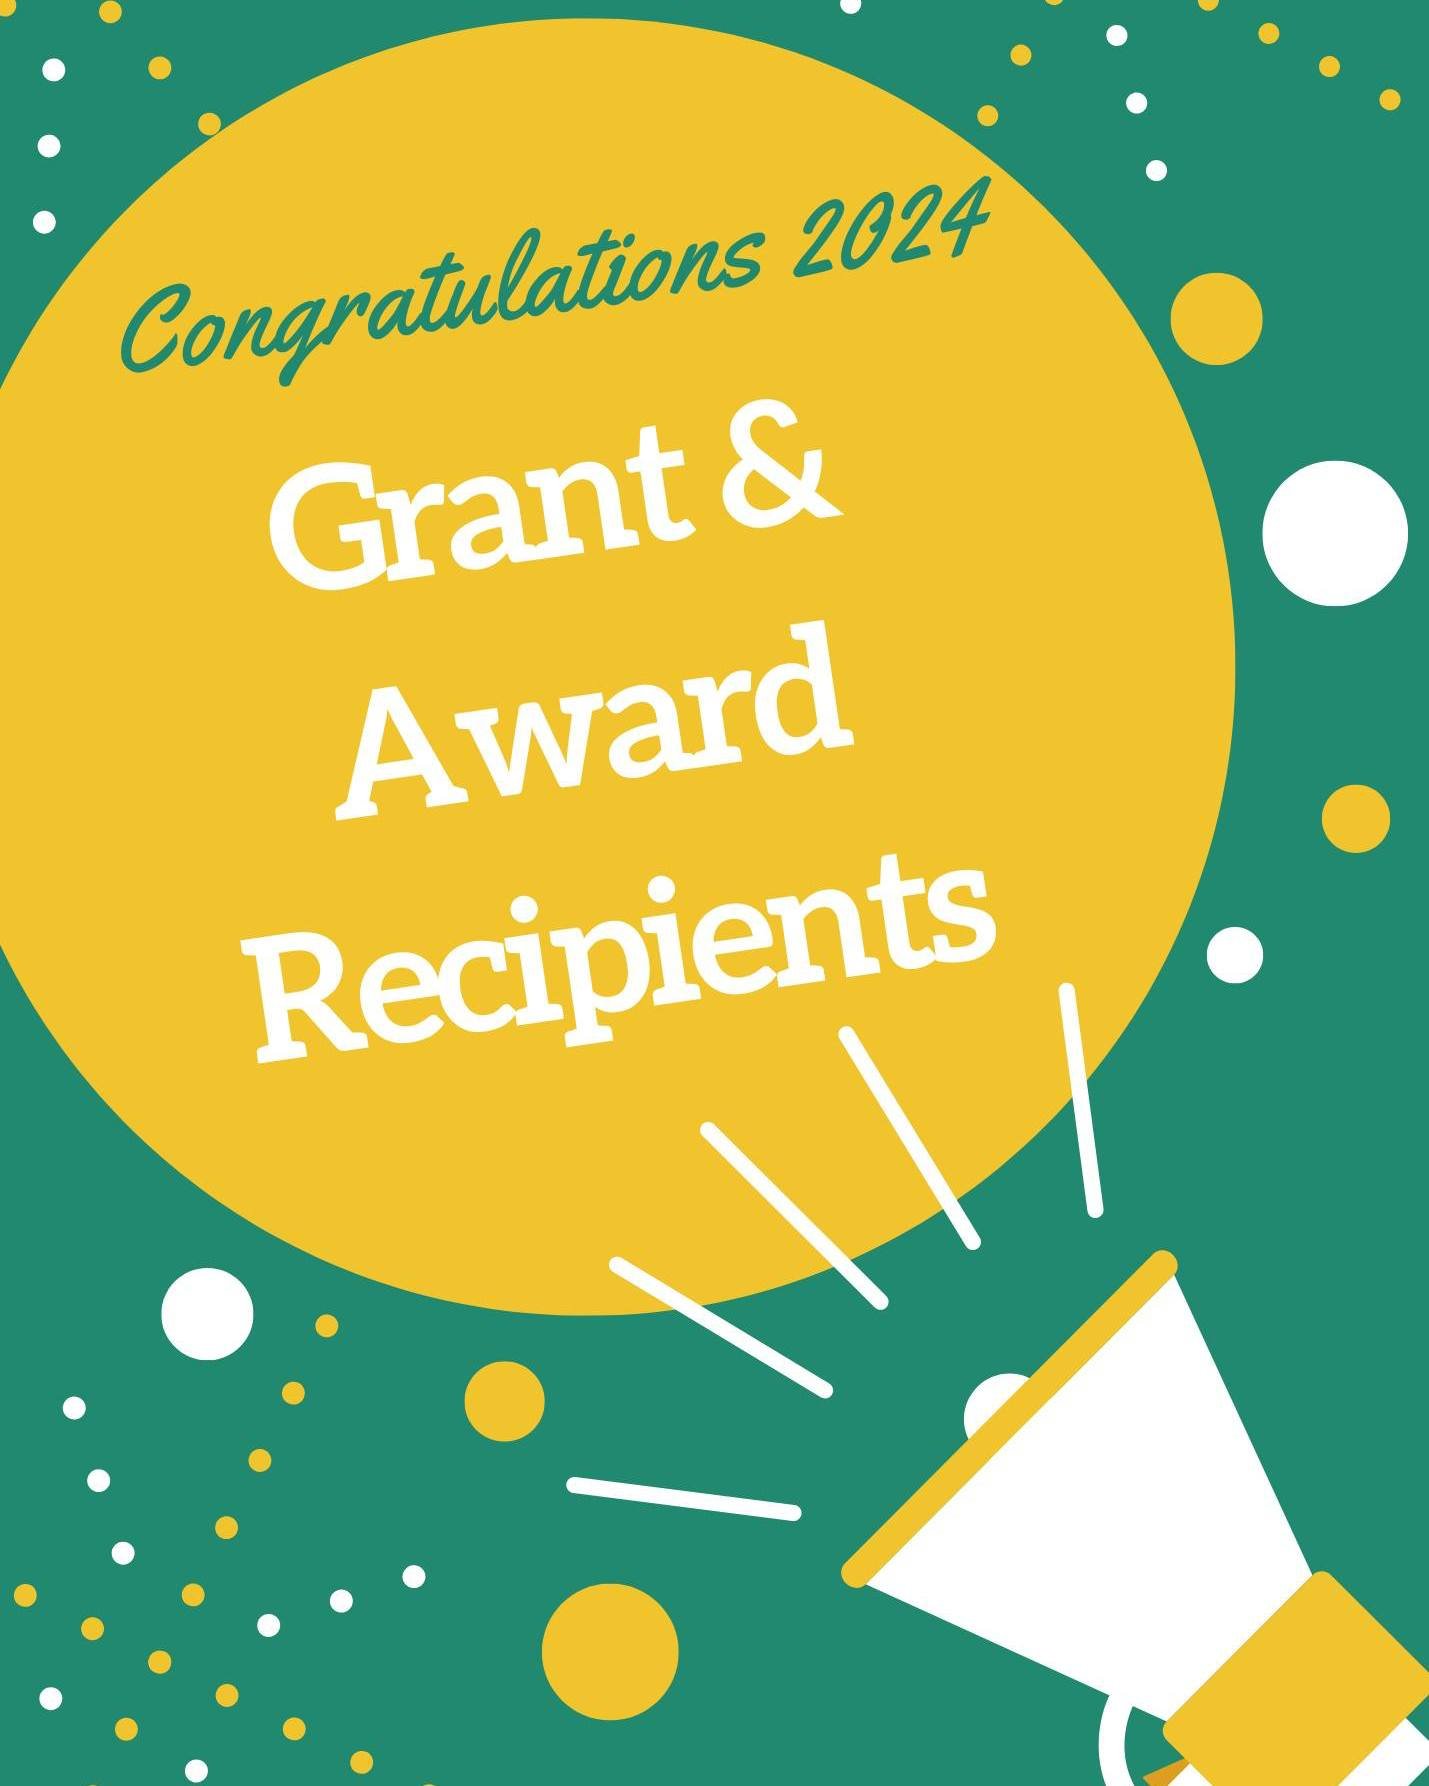 🌟 We are thrilled to announce our first-year grant and award recipients: 🎉 Kuenzang Dorji, Katherine Culbertson, Dr. Hoby Rabesandratra, Julieanne Montaquila, Niony Mamy Koloina Rakotoarivelo, Dr. Andr&eacute;s Link, Lucy Millington, and Eliette No